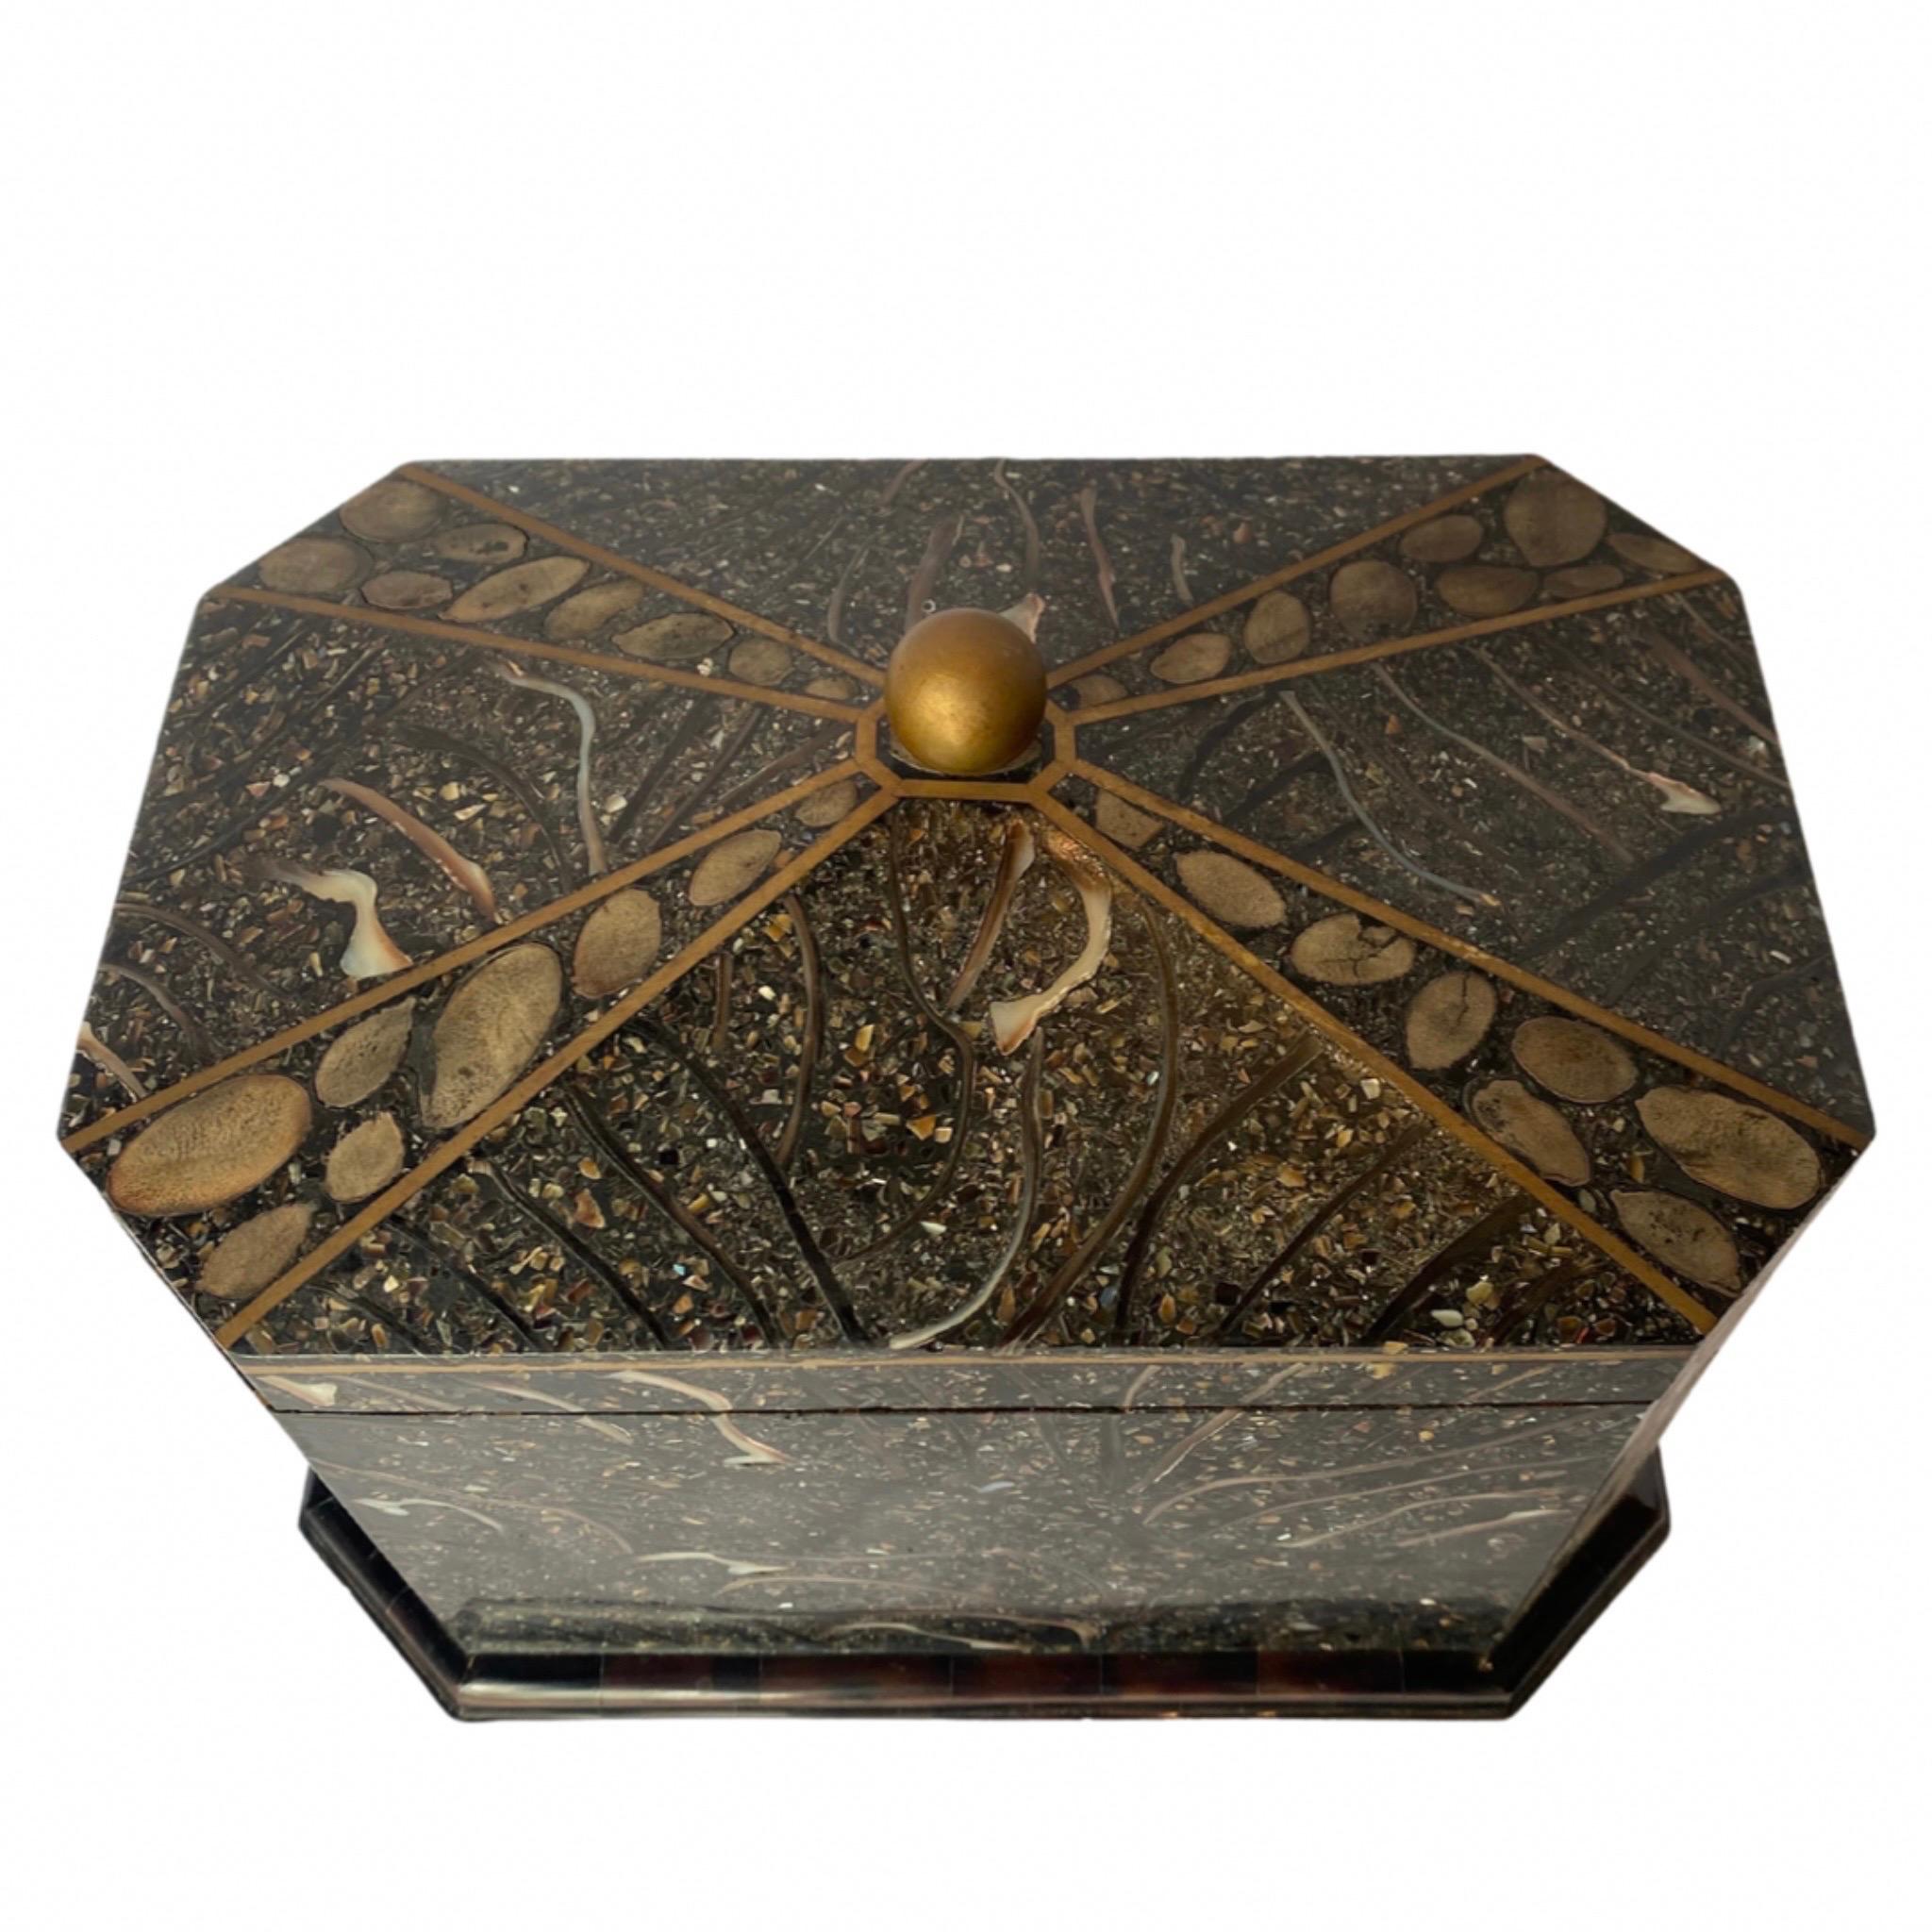 Maitland Smith Fossil Stone Box with Brass Inlay & Legs

     Height : 10 in

     Width : 11.5 in

     Depth : 7.5 in